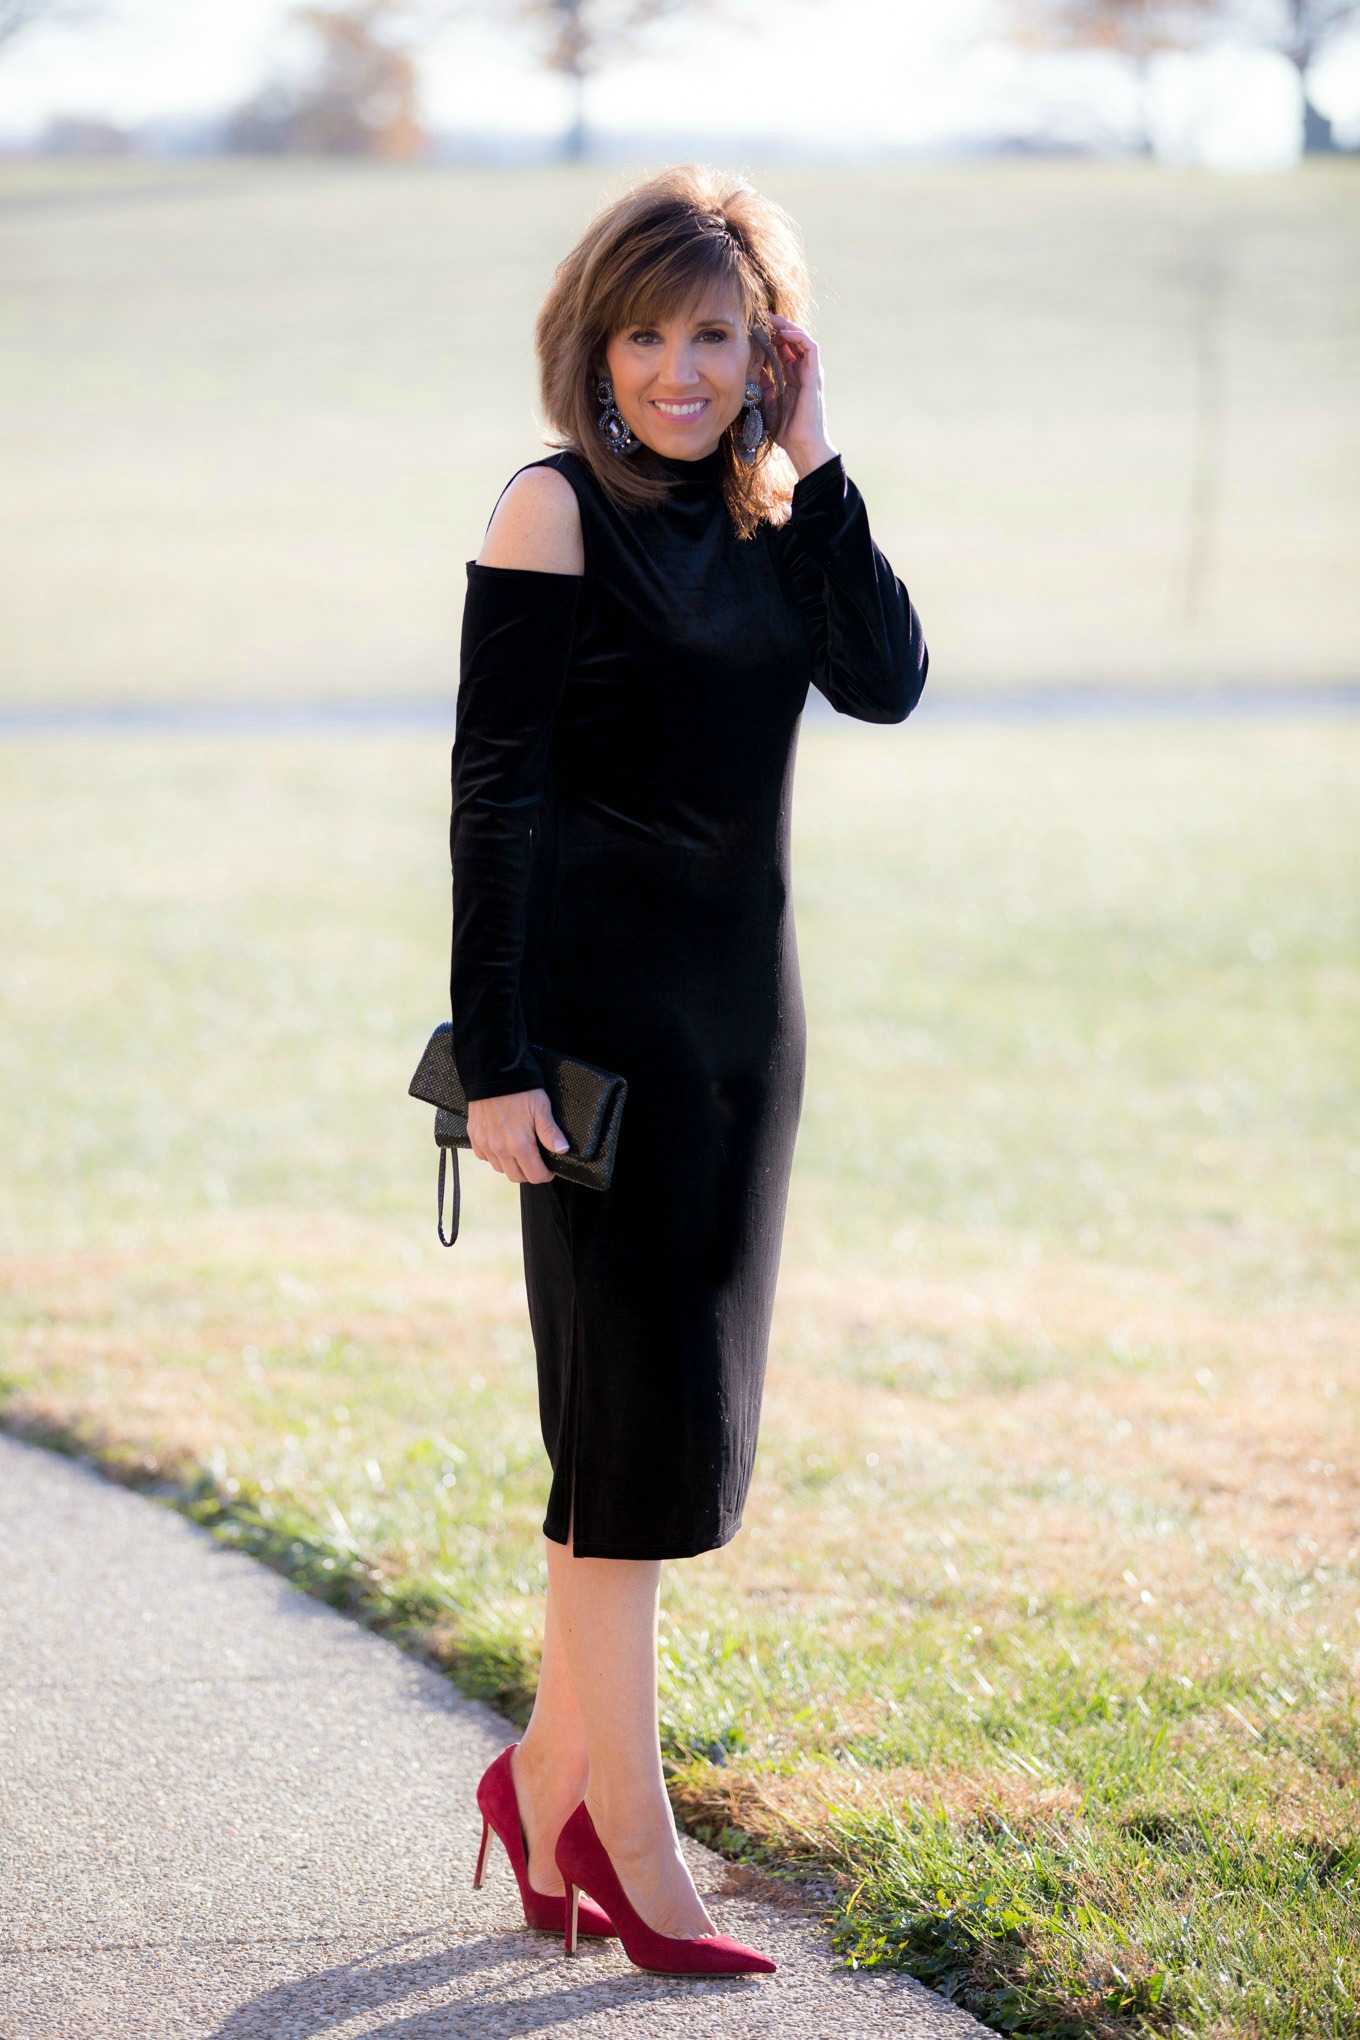 Fashion blogger, Cyndi Spivey, styling a cut out shoulder dress from Nordstrom for holiday style.